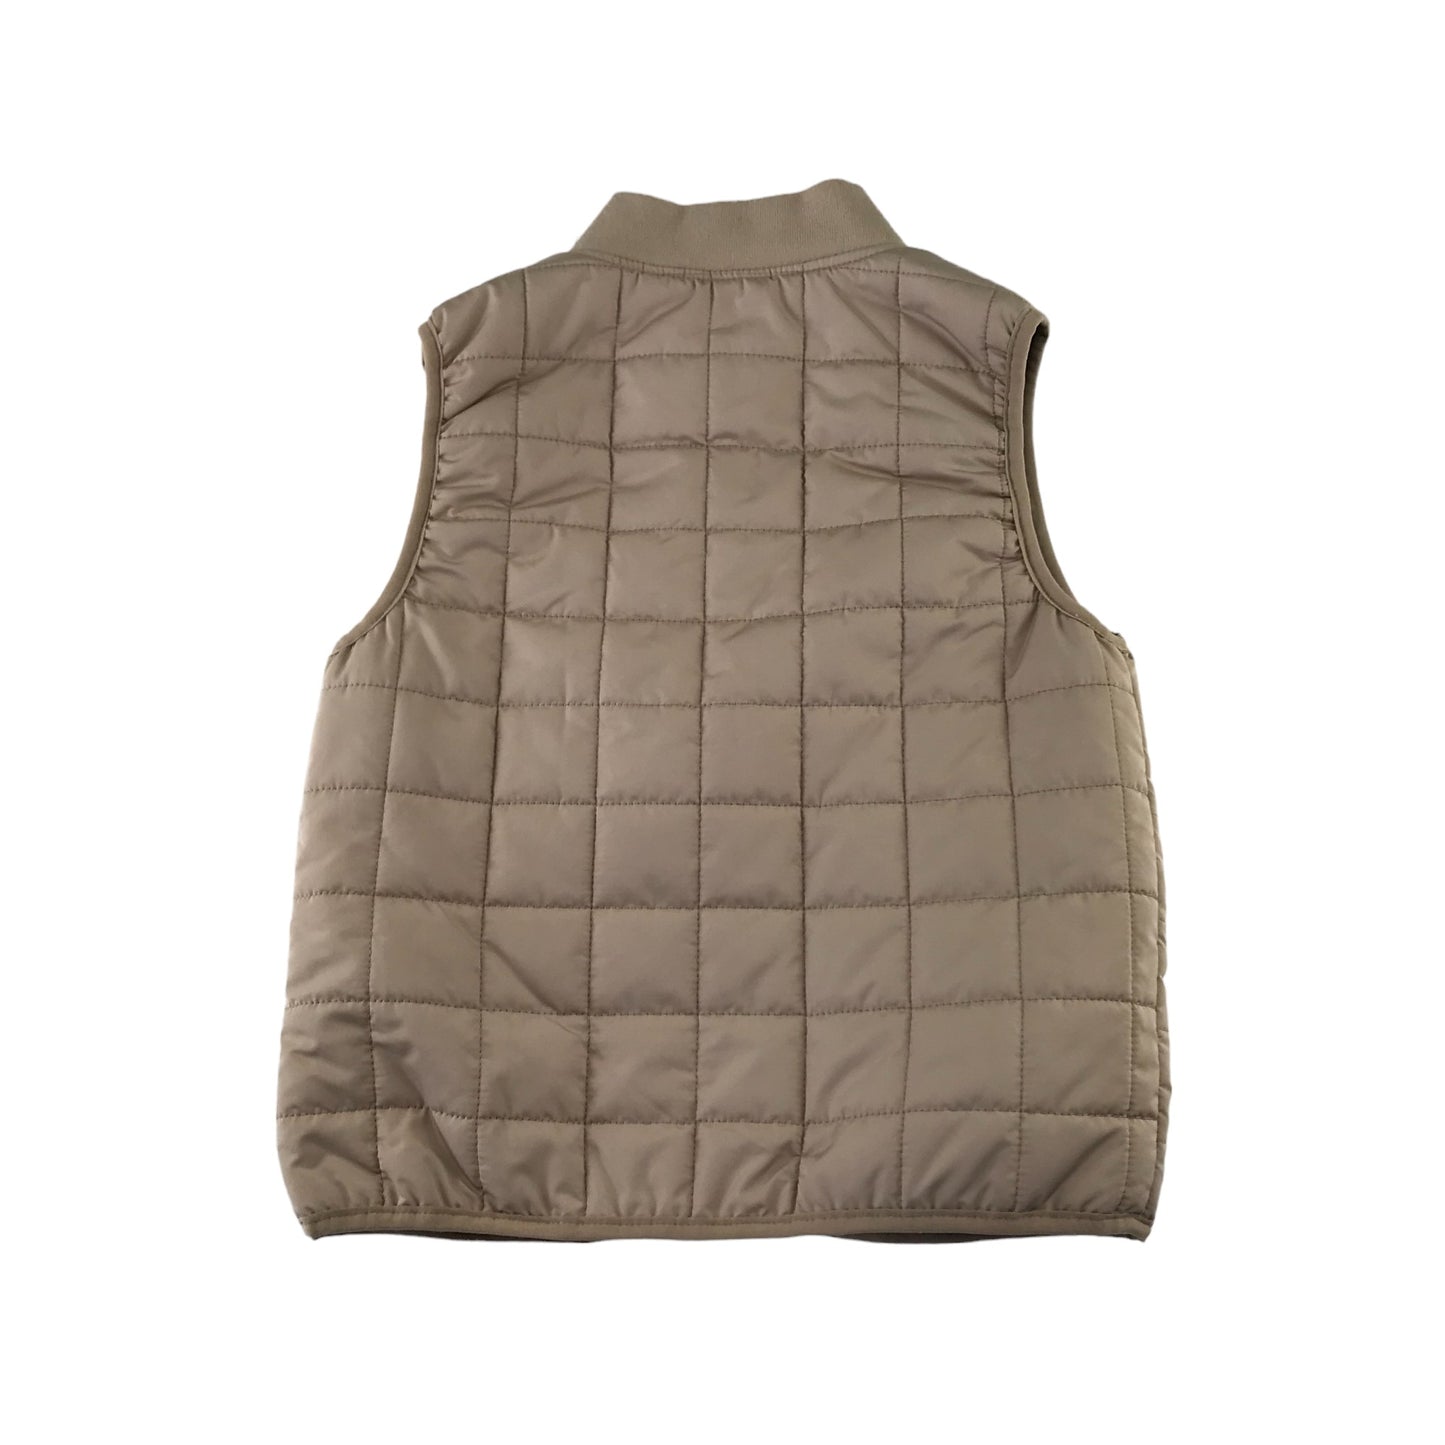 Primark gilet 8-9 years light beige quilted lightly padded